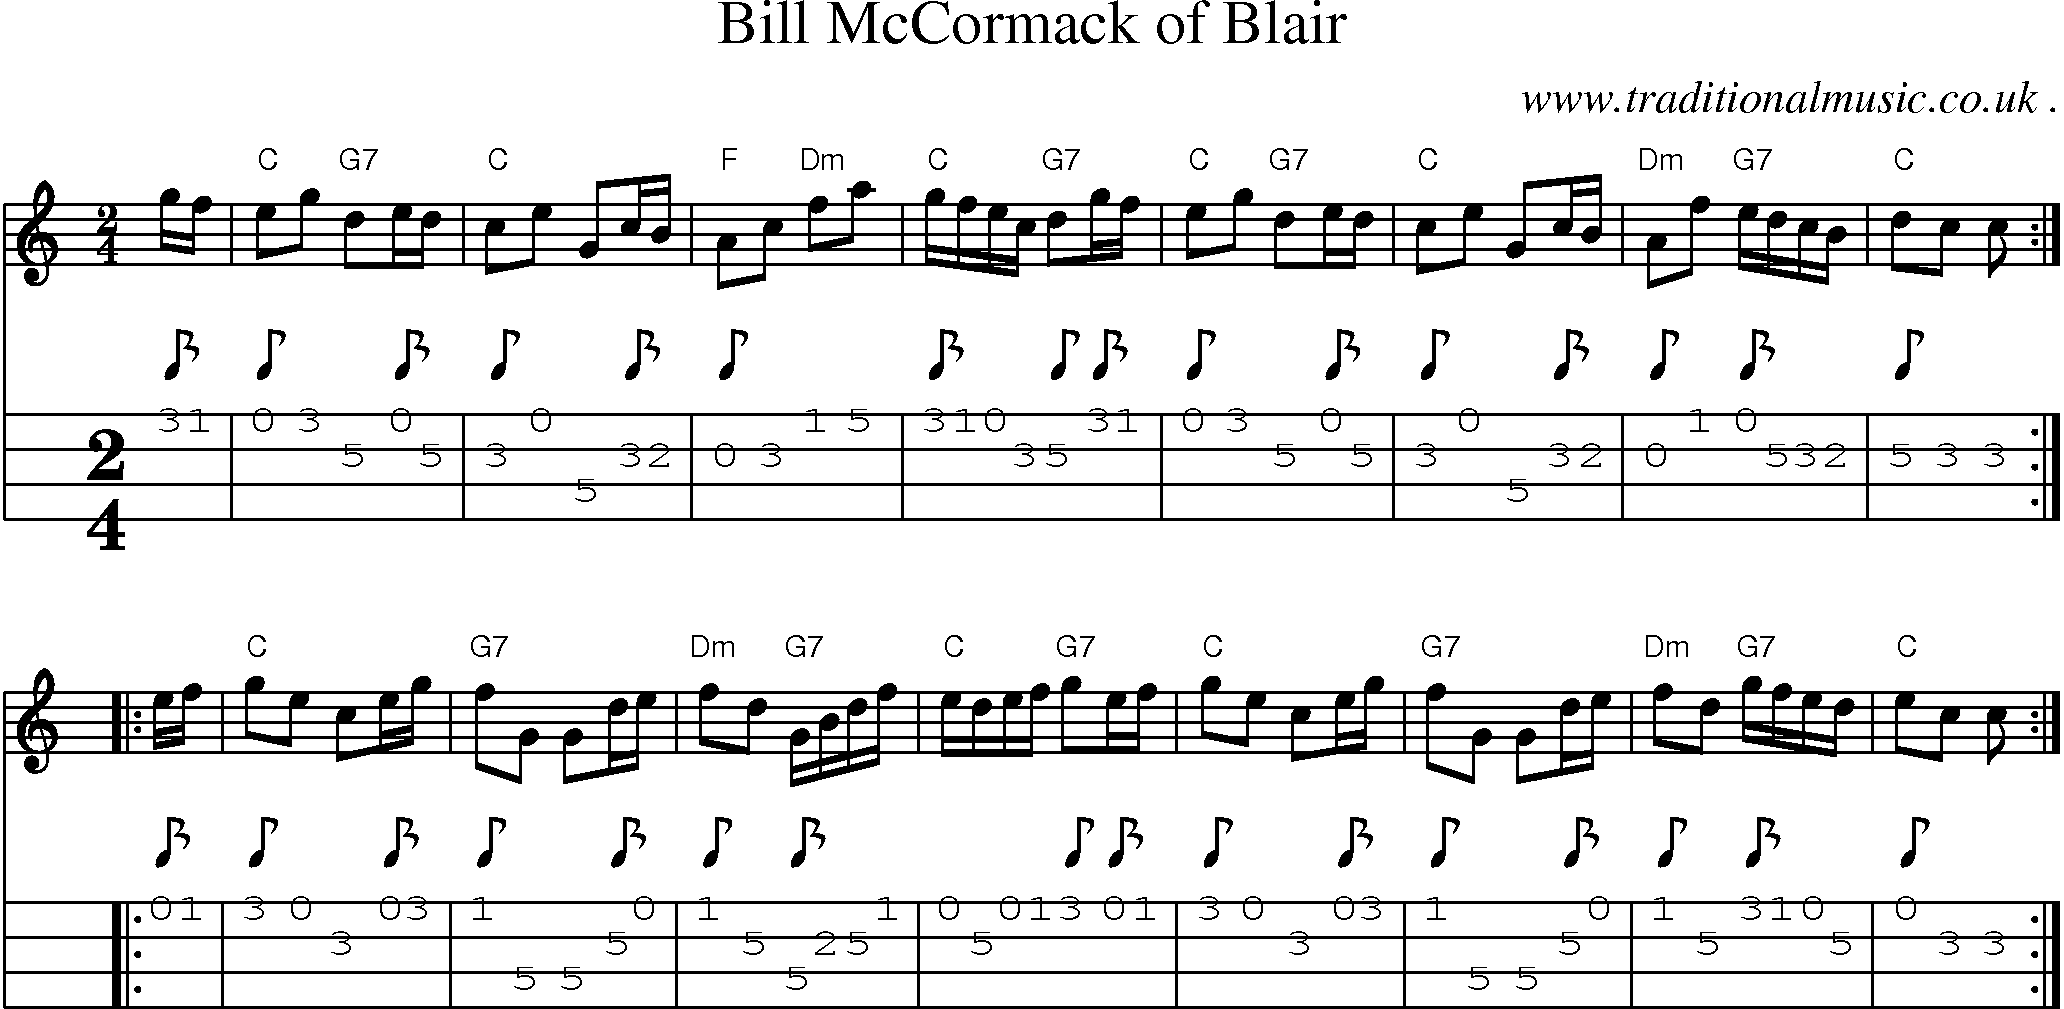 Sheet-music  score, Chords and Mandolin Tabs for Bill Mccormack Of Blair